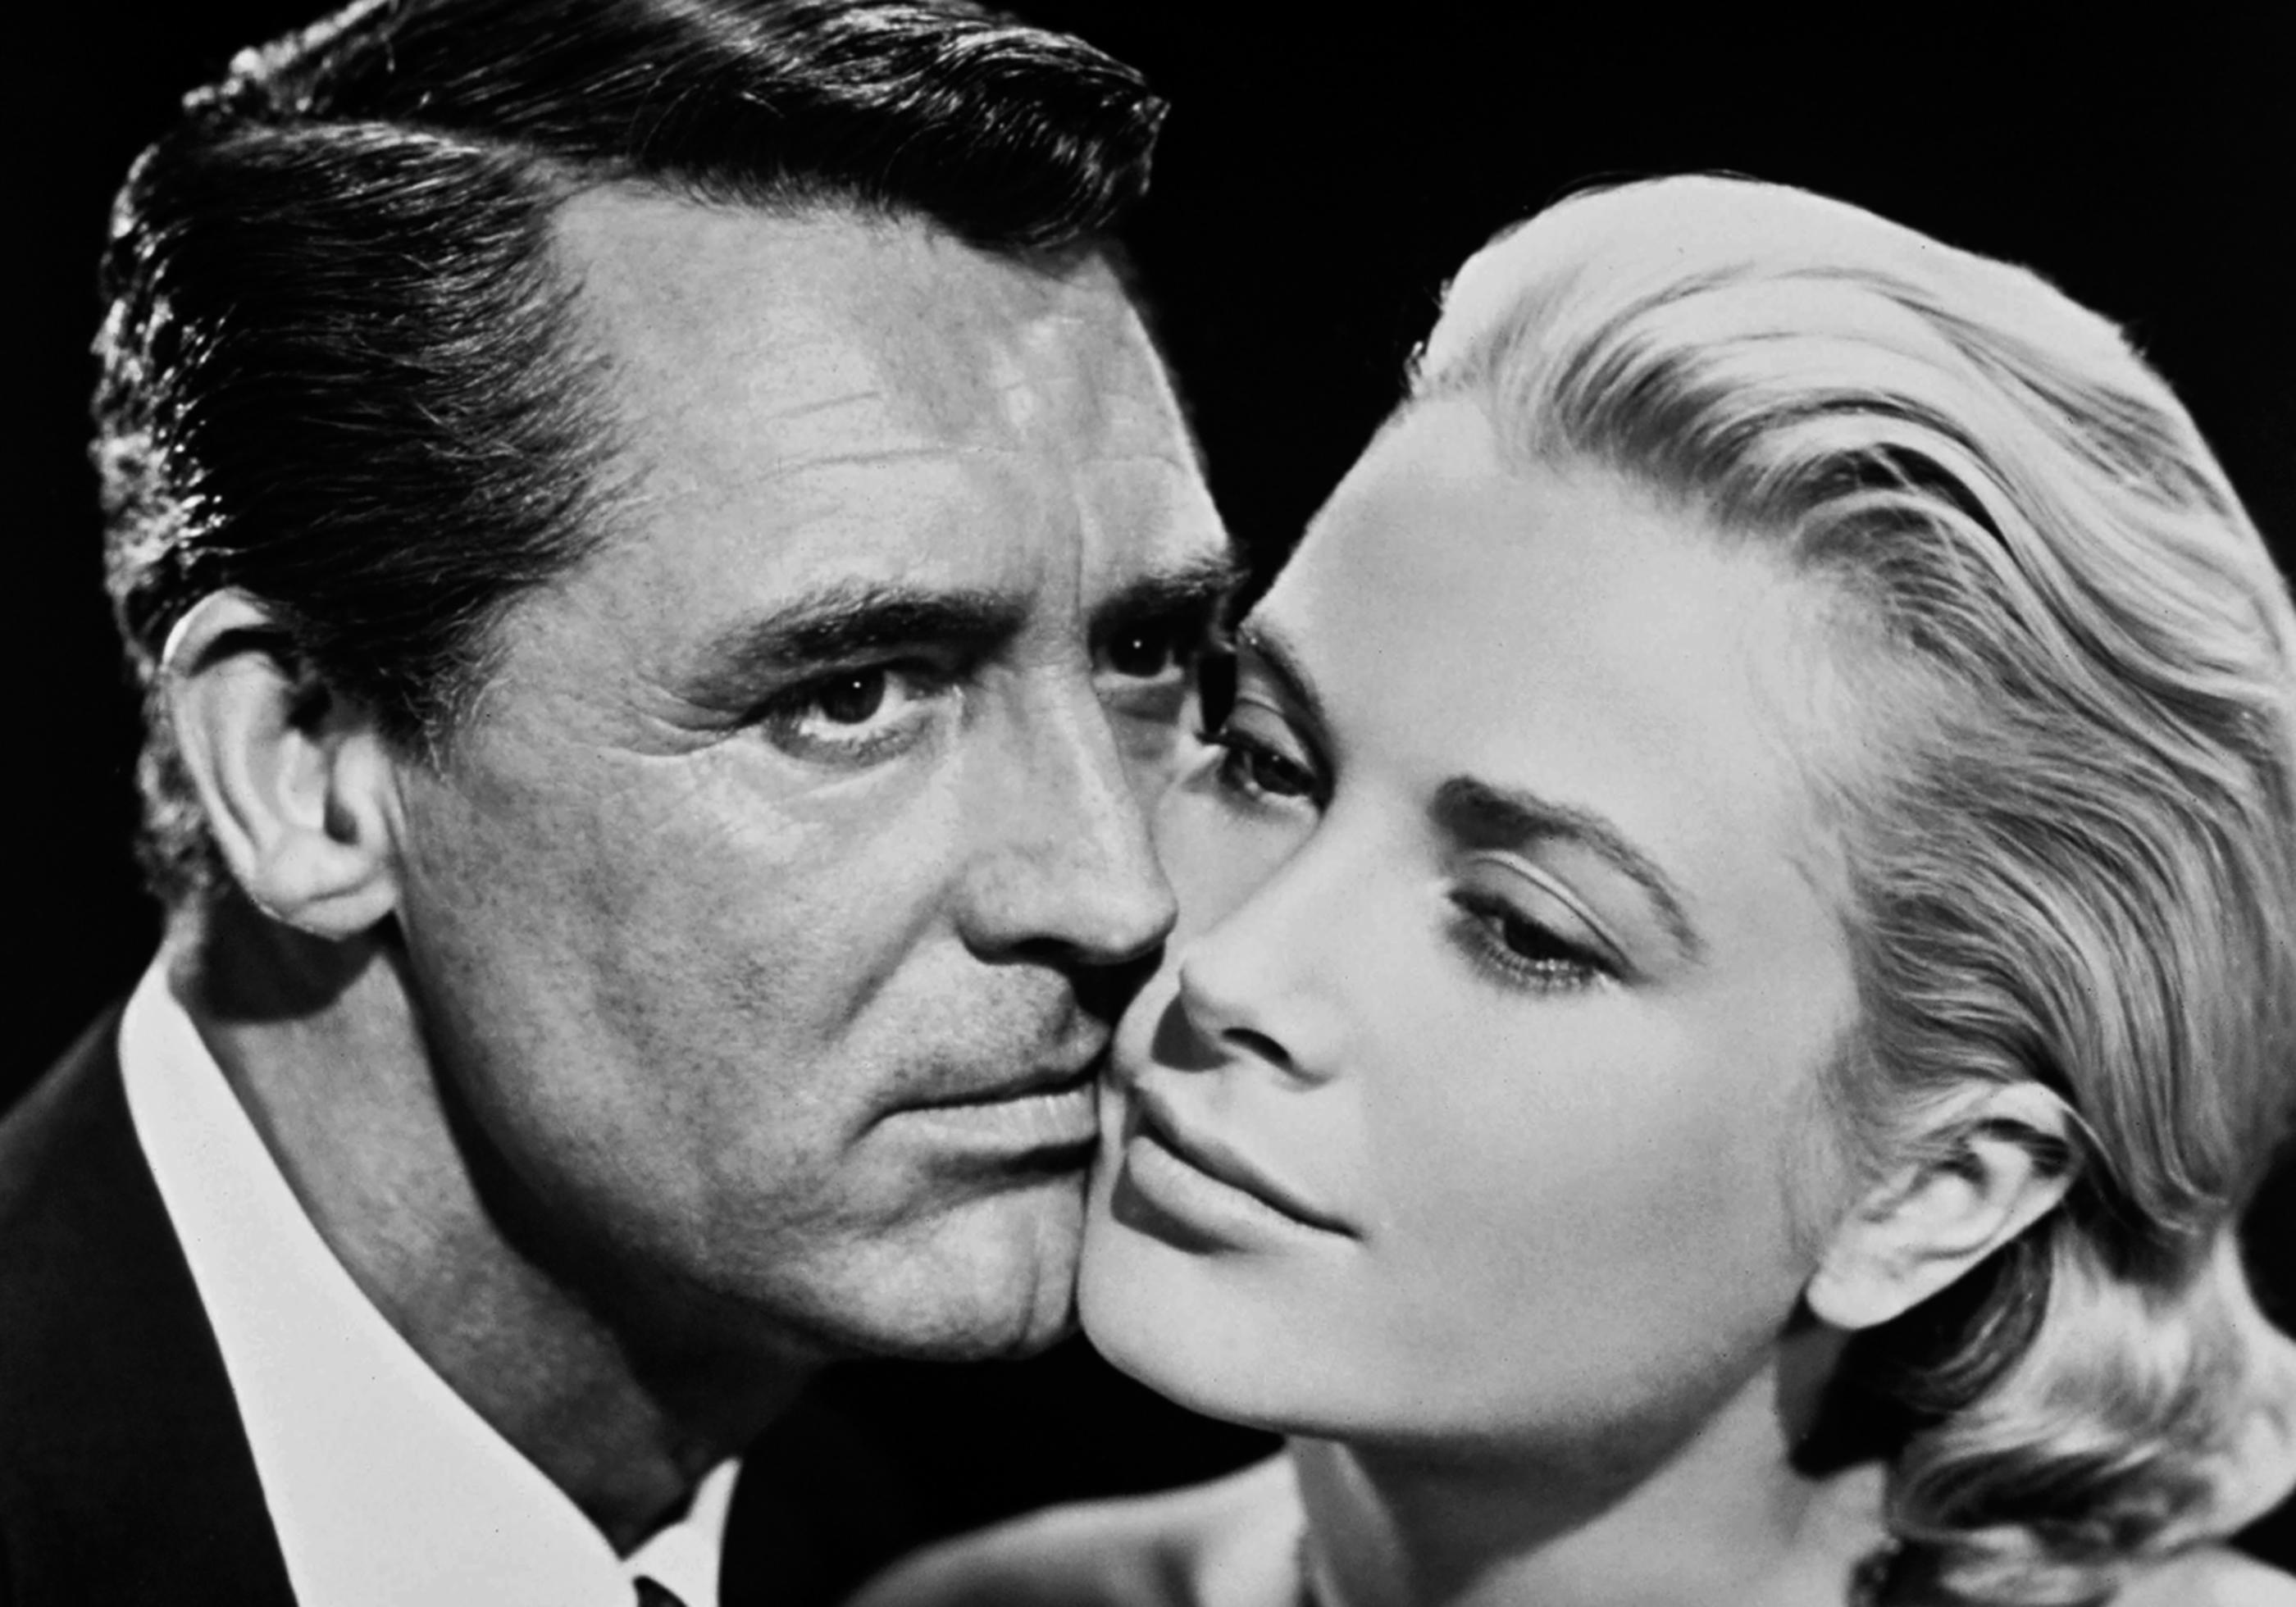 Unknown Black and White Photograph - Cary Grant and Grace Kelly in To Catch a Thief